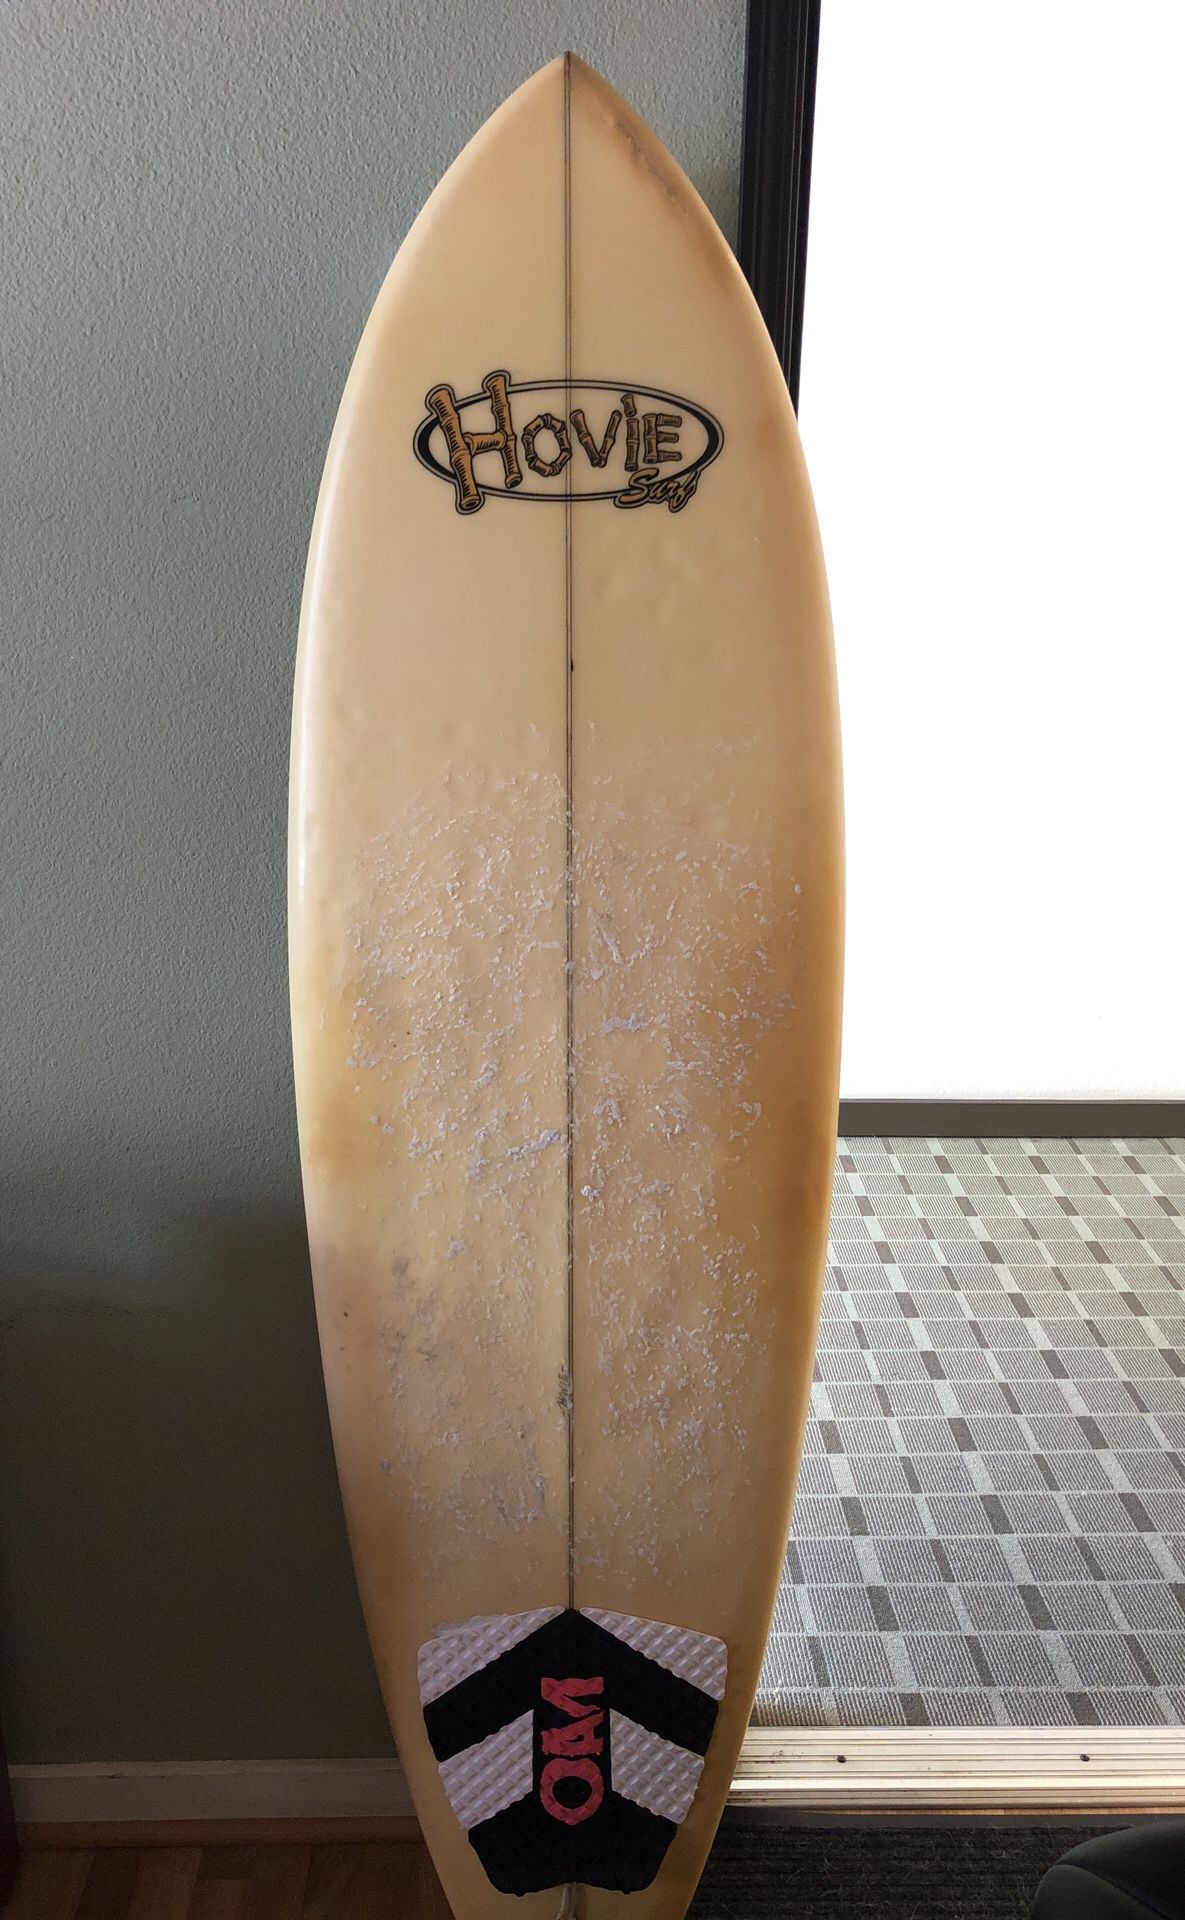 6’1 Fish Hovie Surf Board best offer takes it